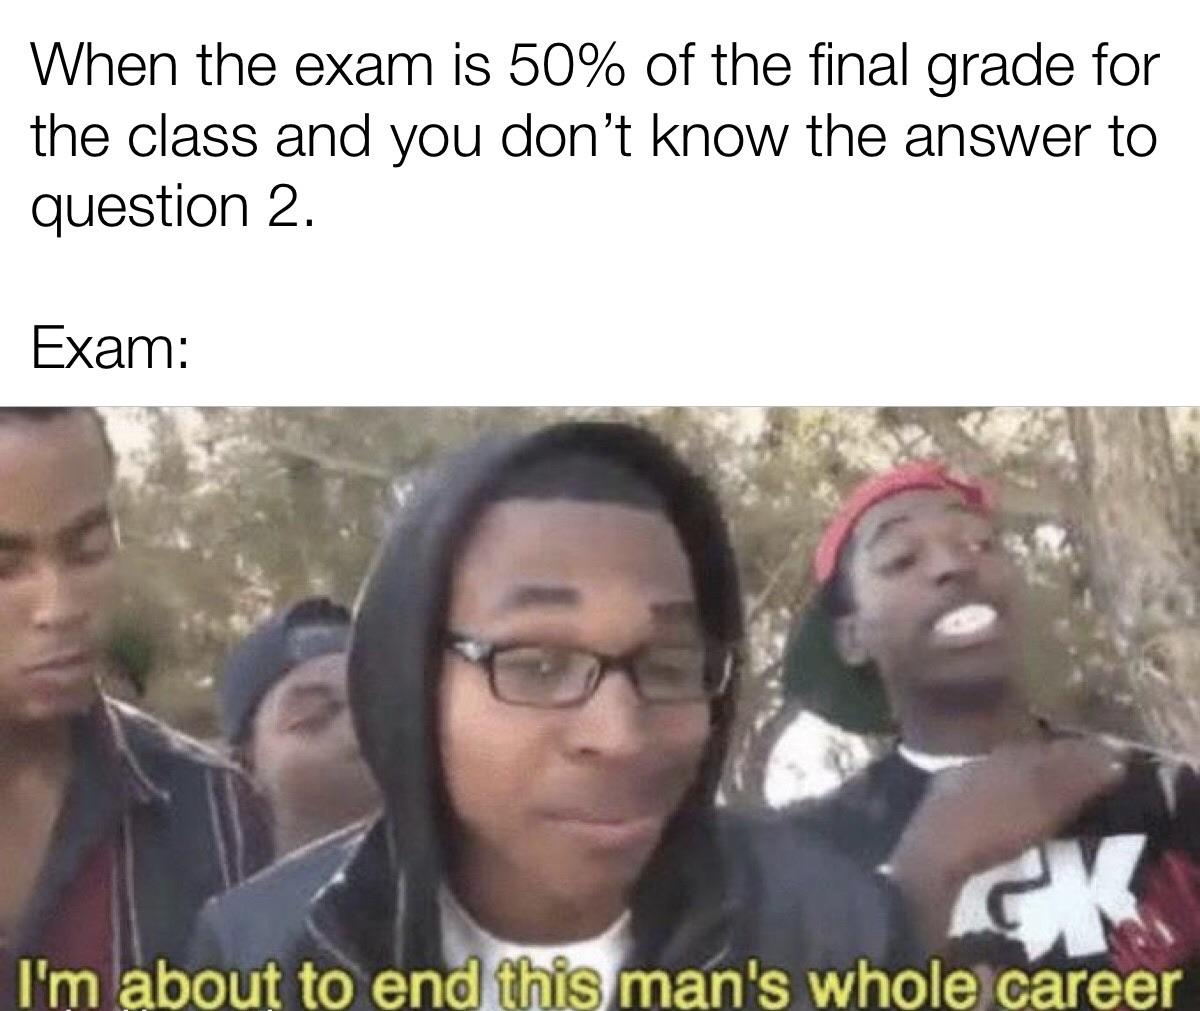 r/collegememes- college dank memes - corona vs ebola meme - When the exam is 50% of the final grade for the class and you don't know the answer to question 2. Exam Gk I'm about to end this man's whole career